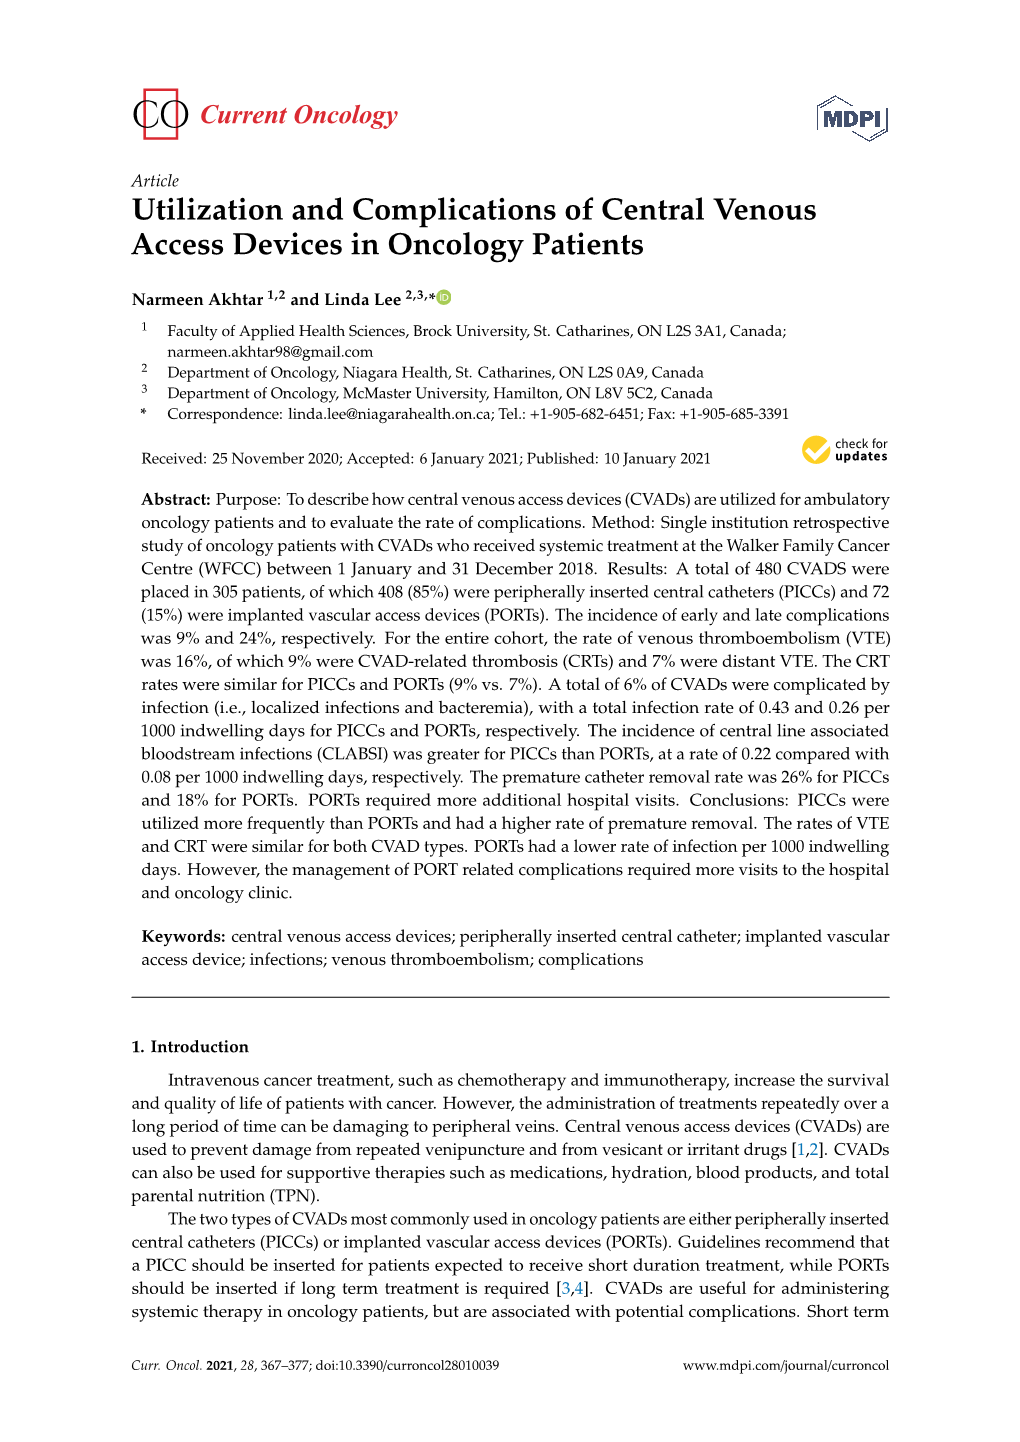 Utilization and Complications of Central Venous Access Devices in Oncology Patients